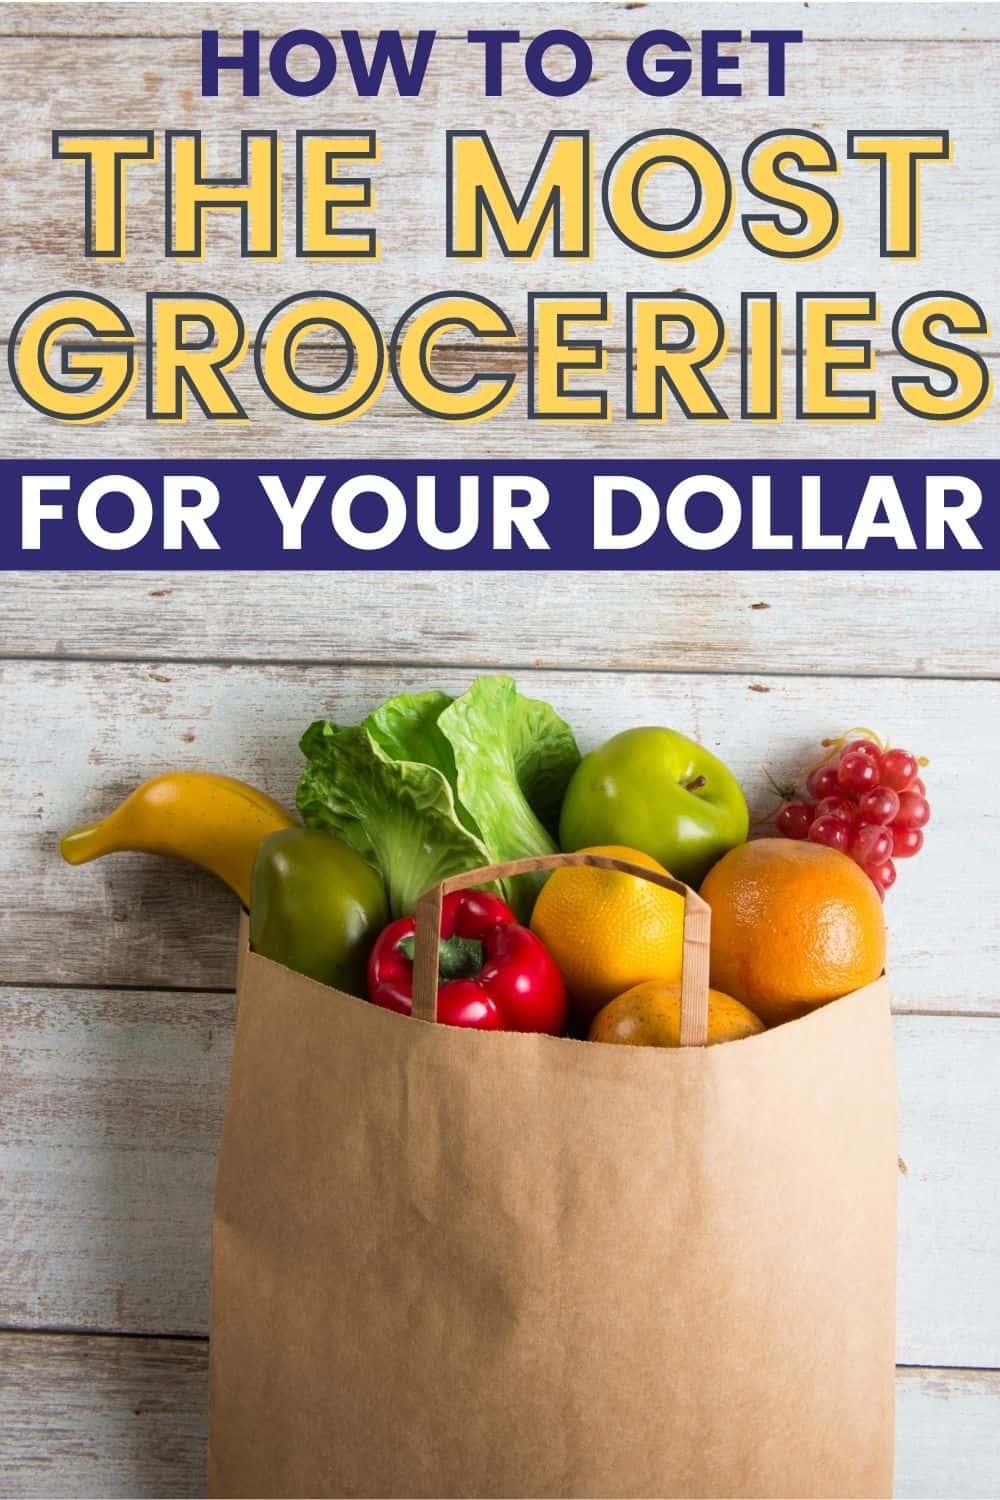 How to get the most groceries for your dollar - Maximizing your food dollars